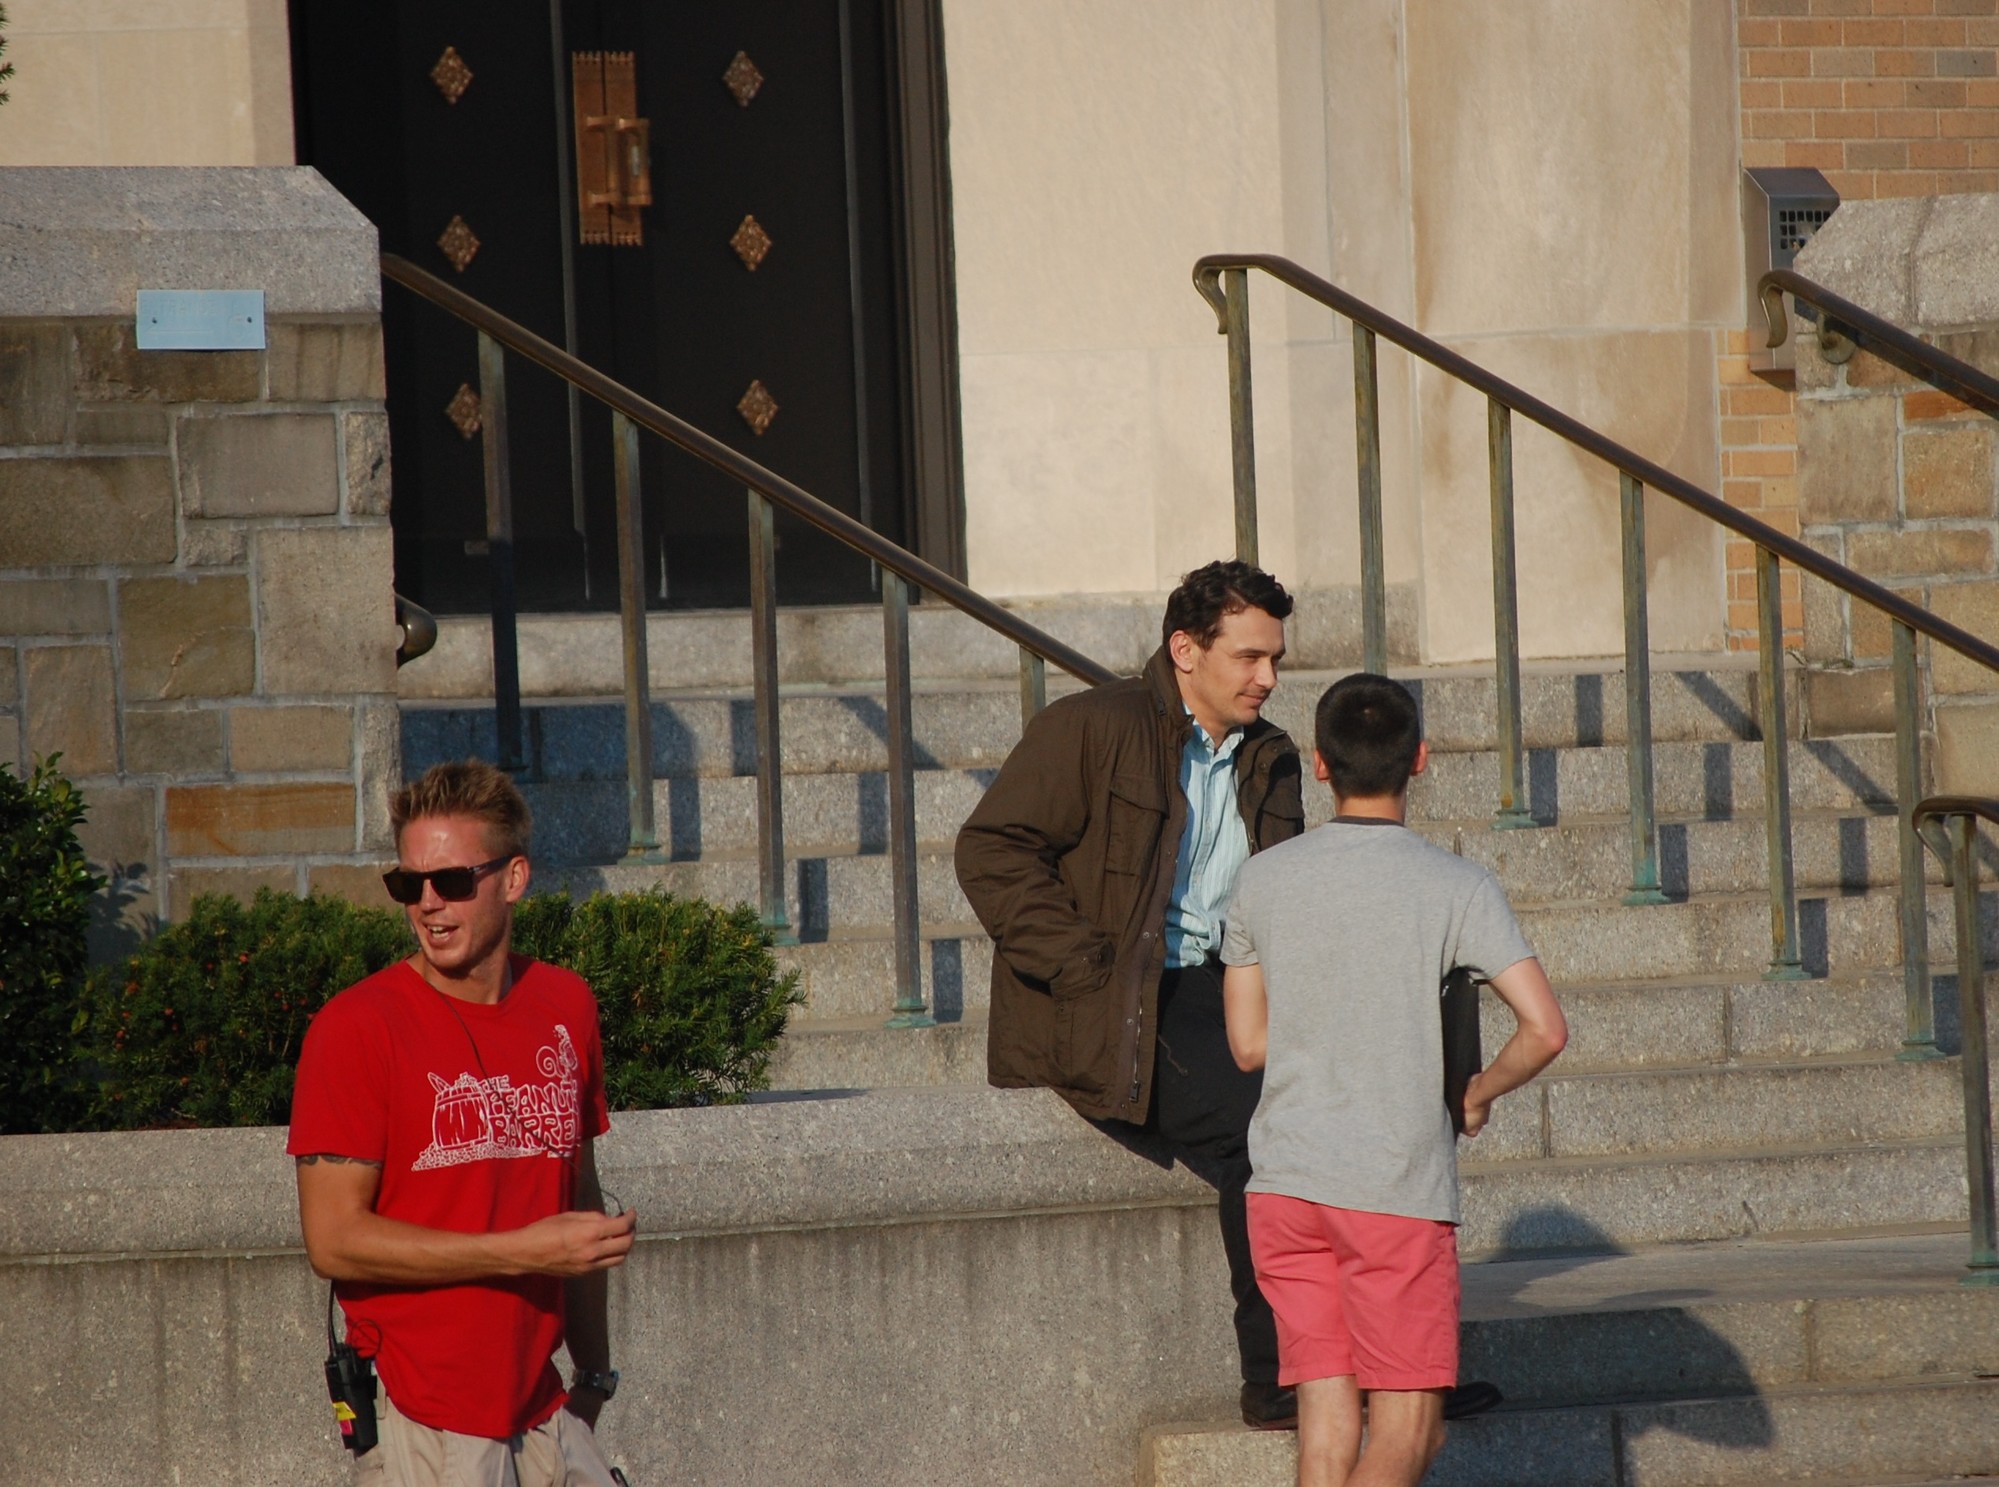 James Franco, center, took a break between takes last week in front of St. Christopher’s Church.